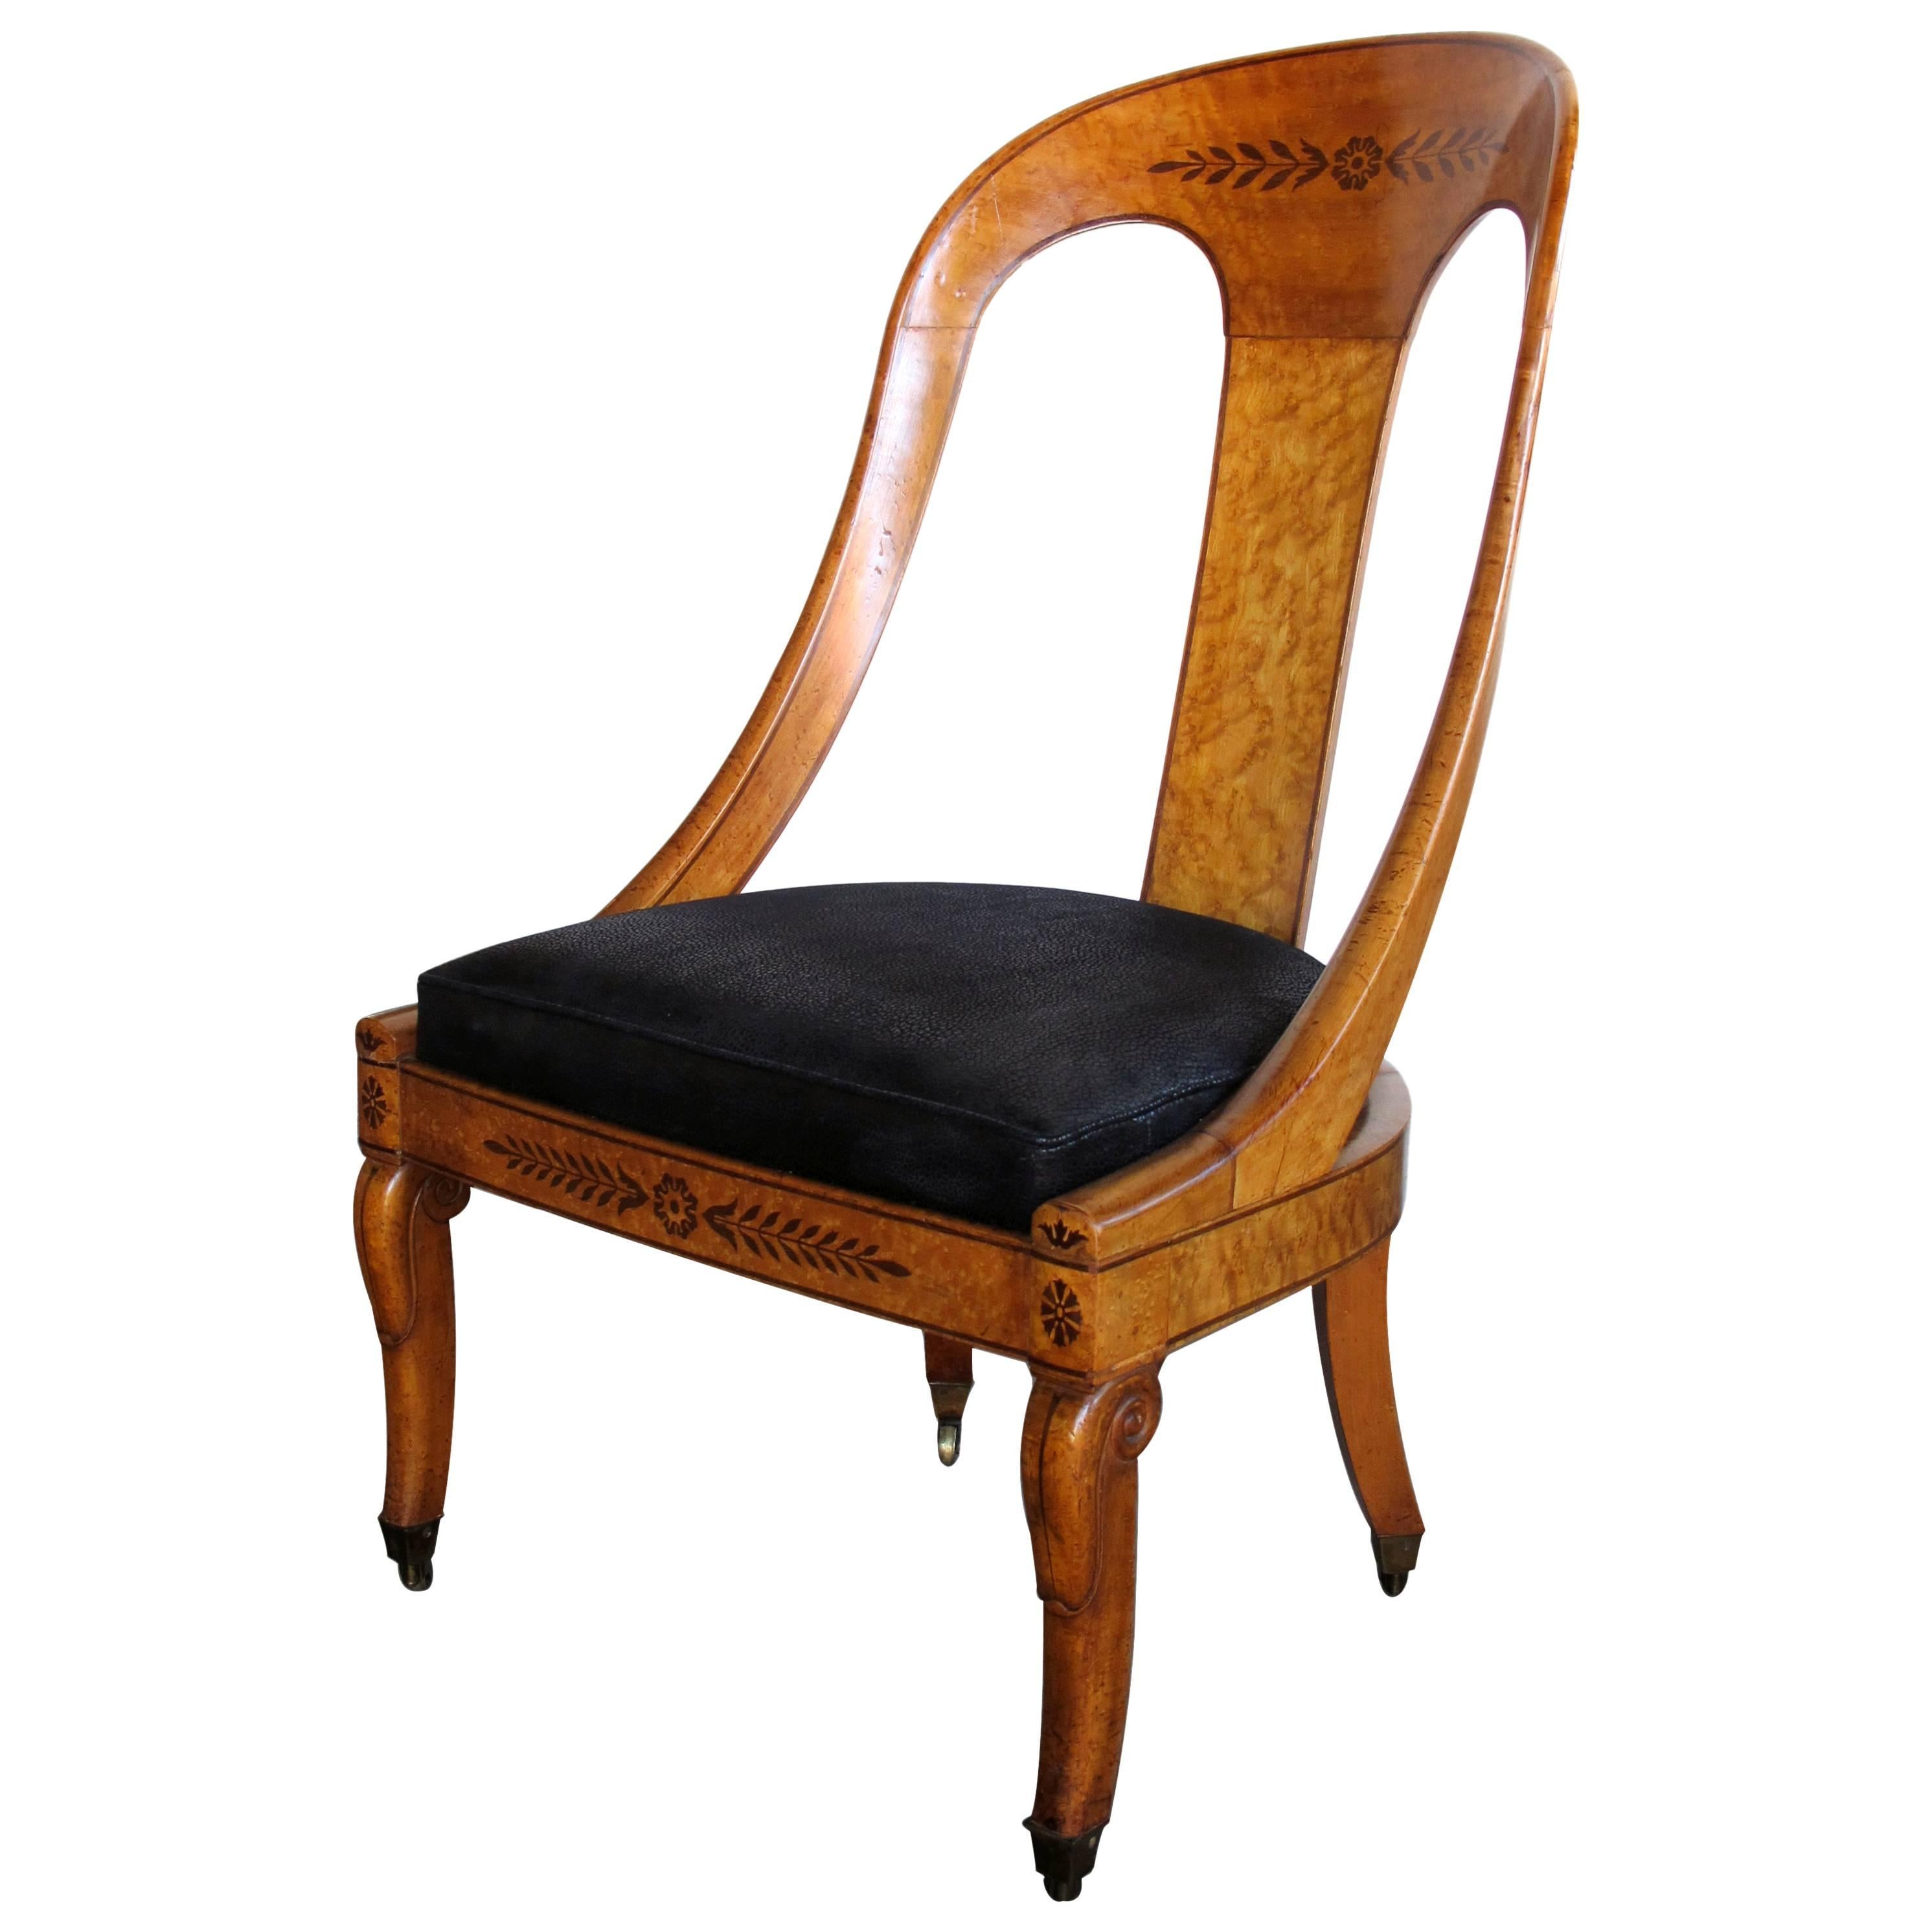 Handsome French Charles X Burl Birch Spoon Back Chair For Sale